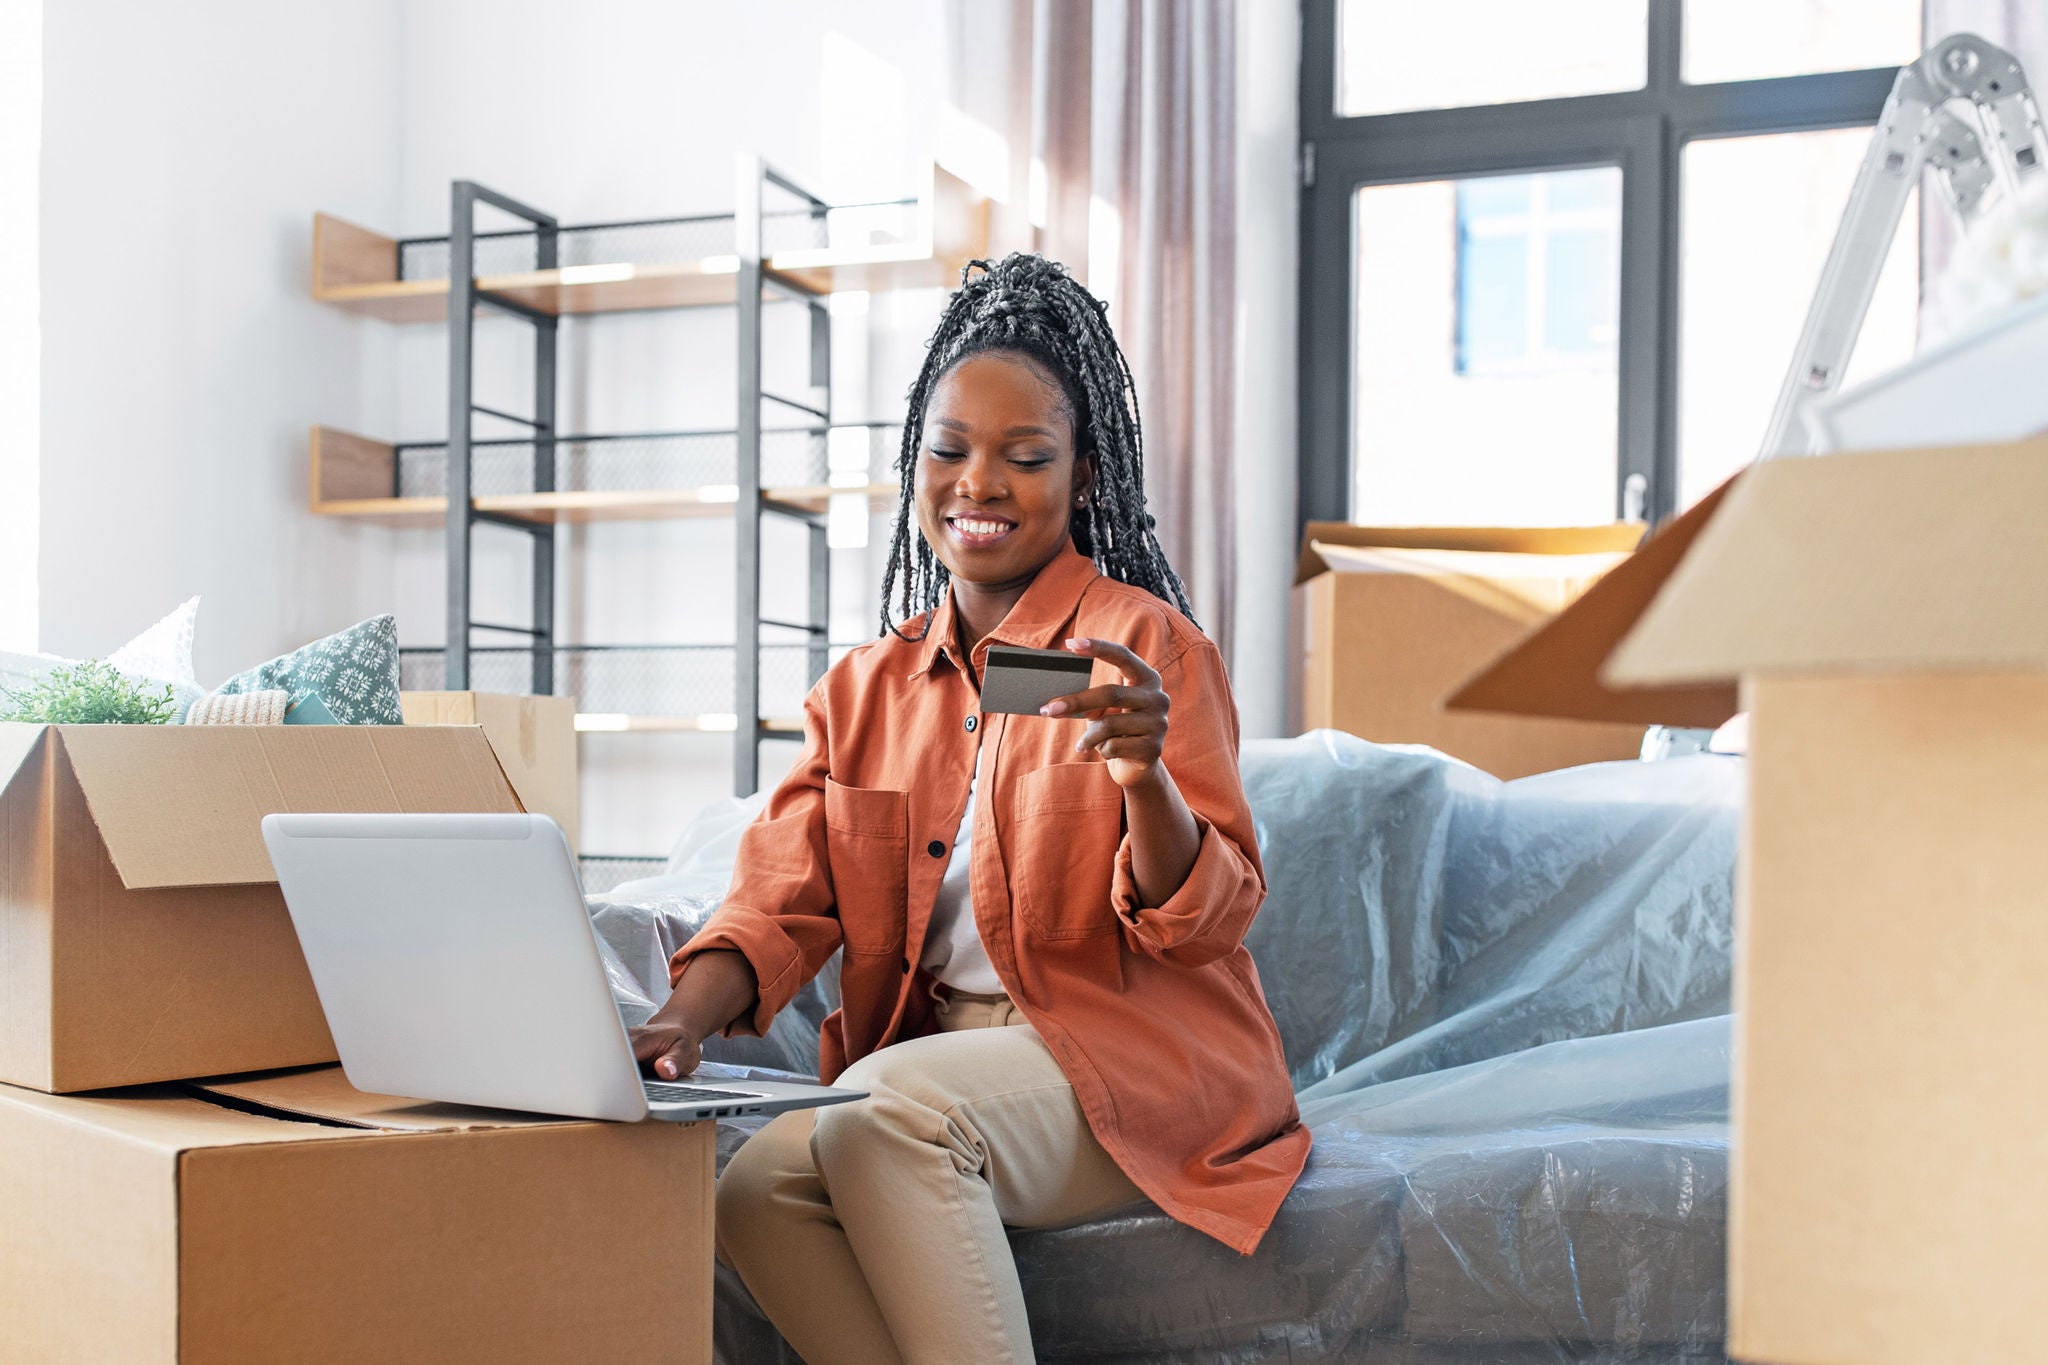 moving, people and real estate concept - happy smiling woman with laptop computer and credit card at new home